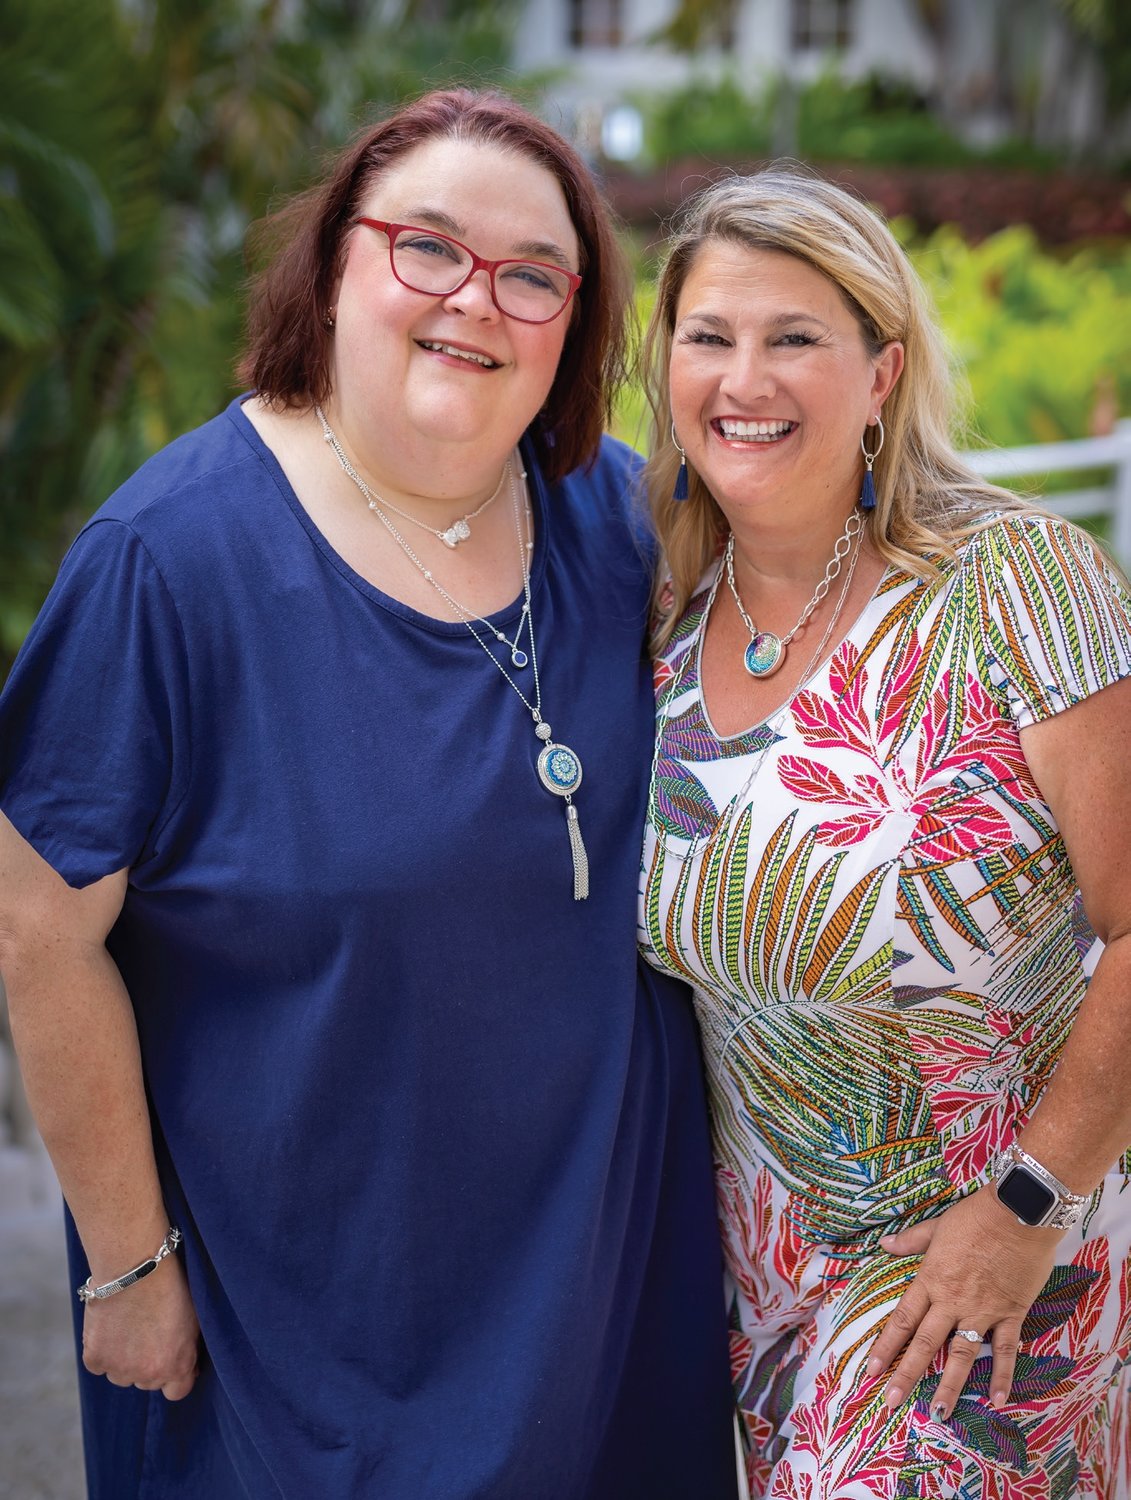 Style Dots' founders are Karen Green, left, and Springfield resident Gina Smith.